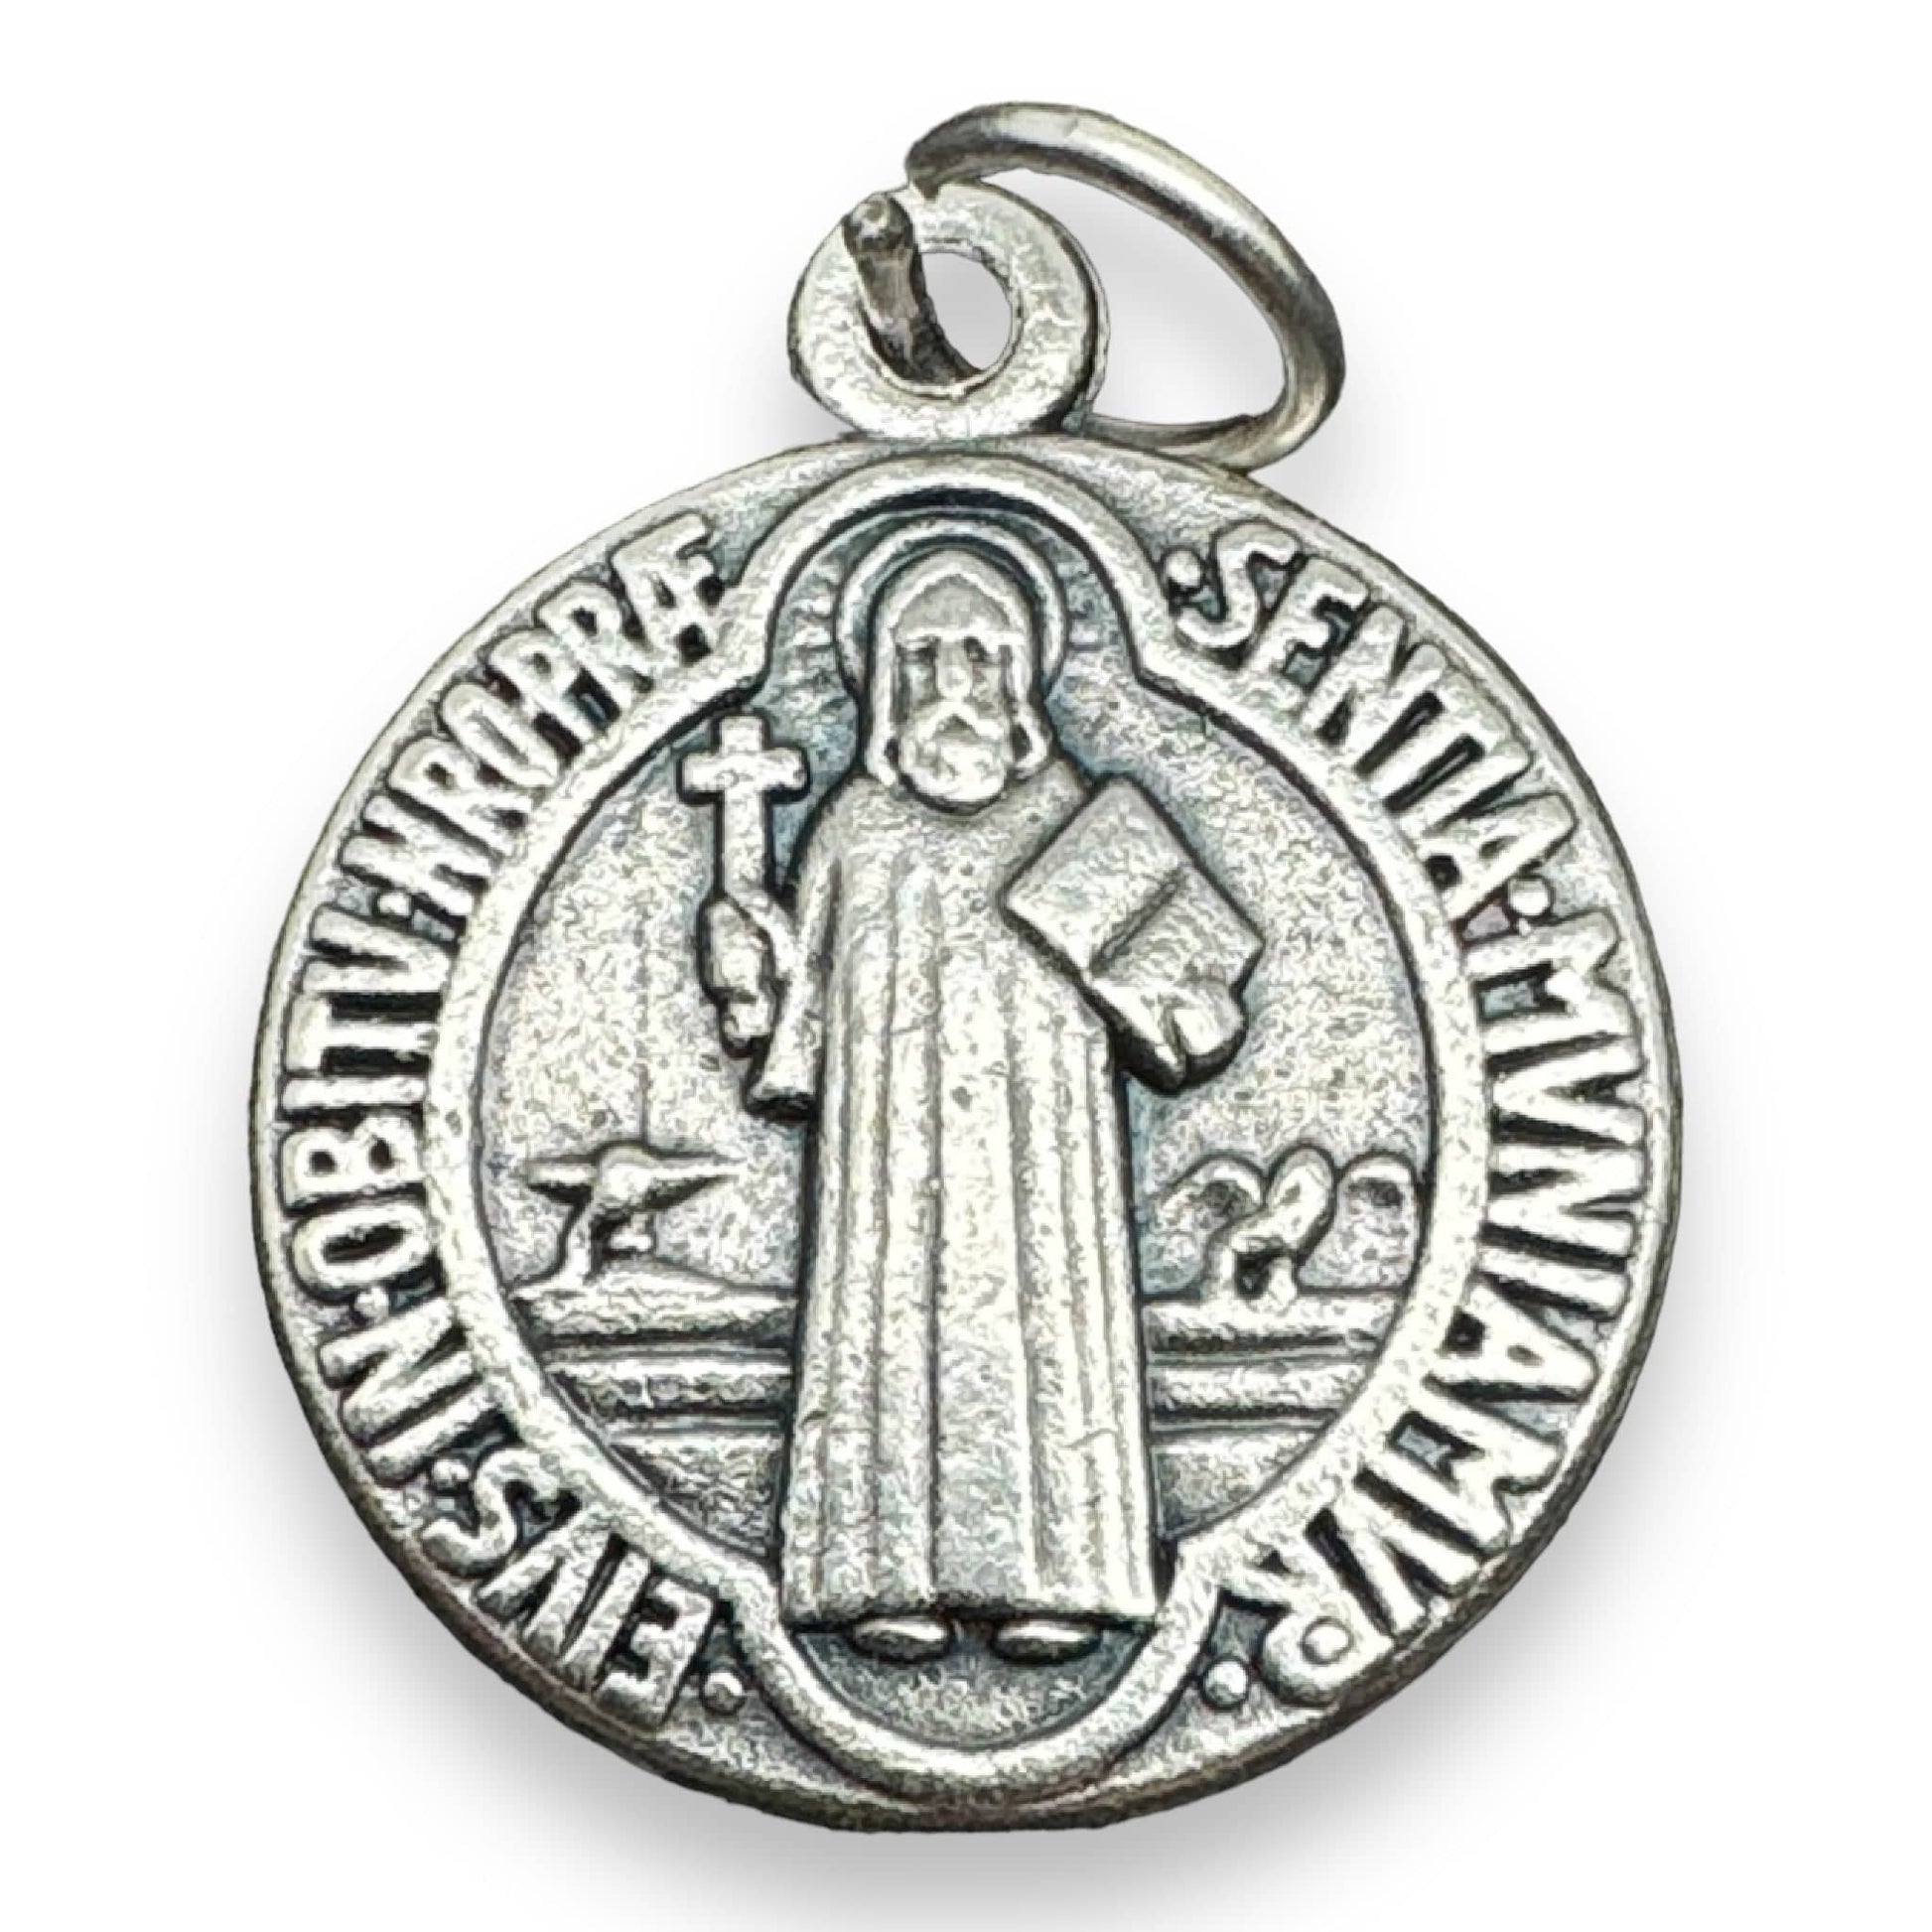 Catholically St Benedict Medal St. Benedict 3/4" Medal - Set of 2 - Catholic Exorcism - Blessed By Pope